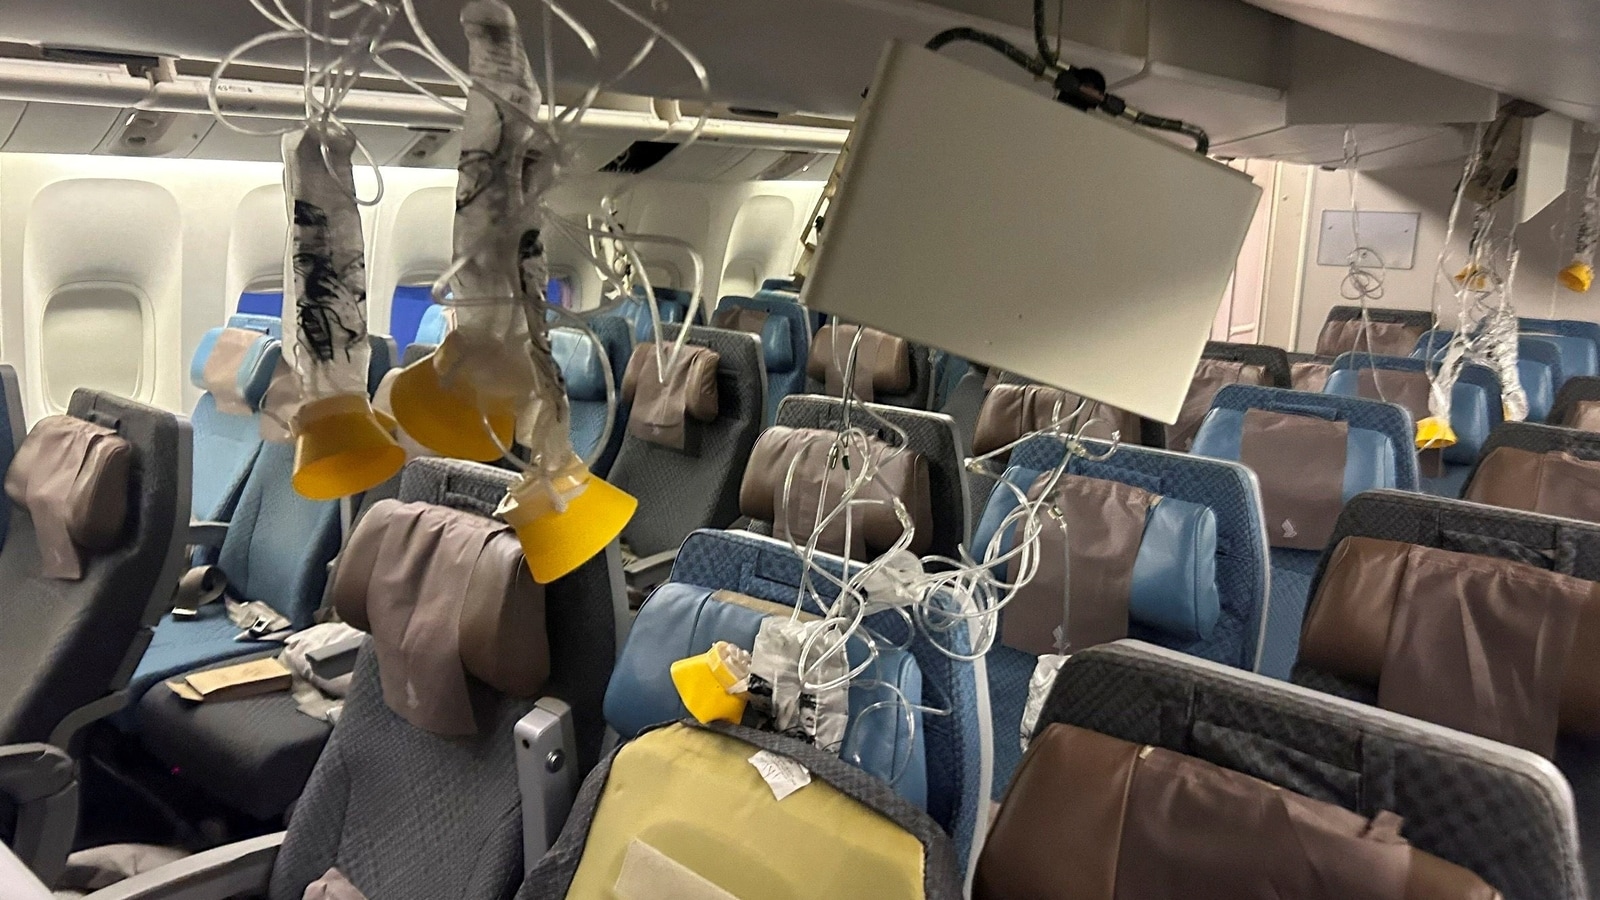 Singapore Airlines flight horror: 3 Indians among passengers hit by plane turbulence